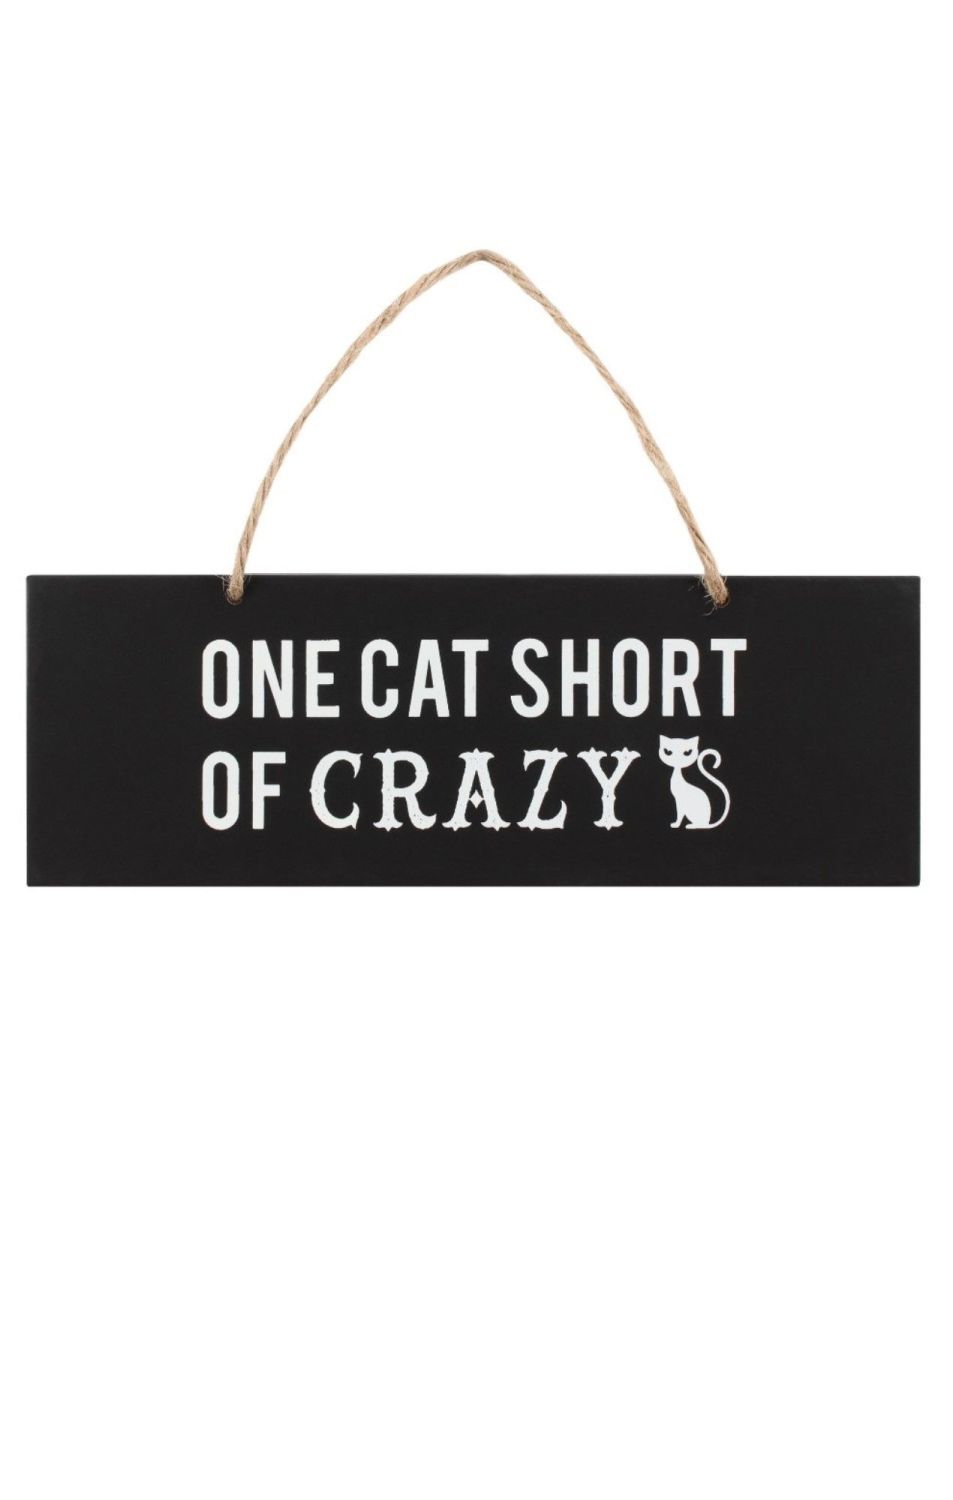 One cat short wooden sign RRP £9.99